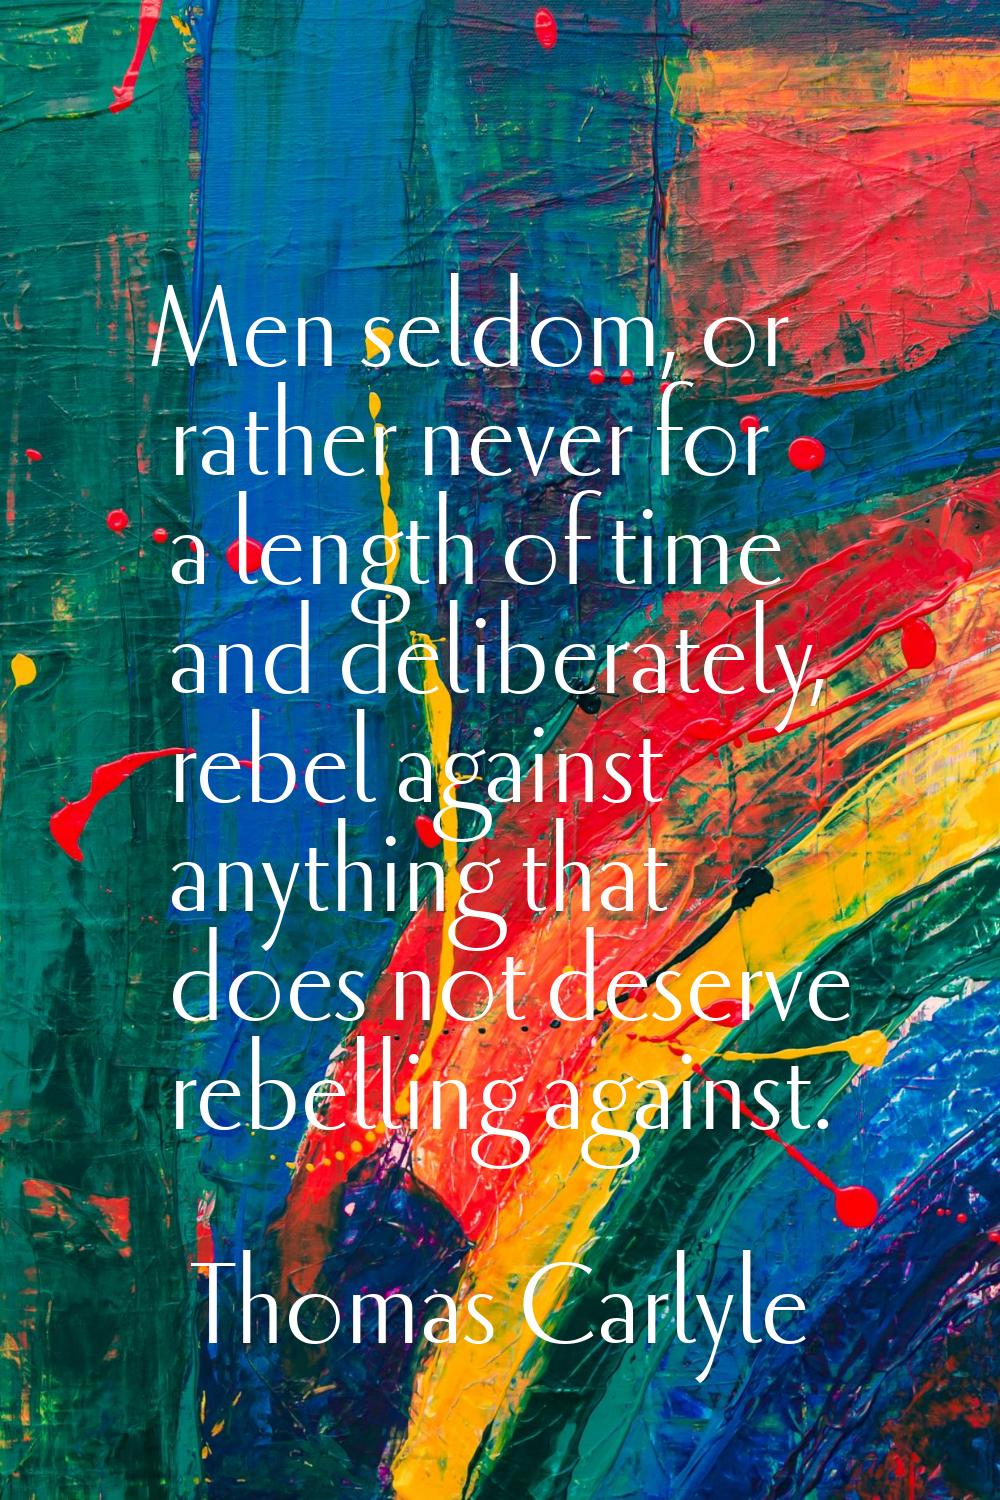 Men seldom, or rather never for a length of time and deliberately, rebel against anything that does